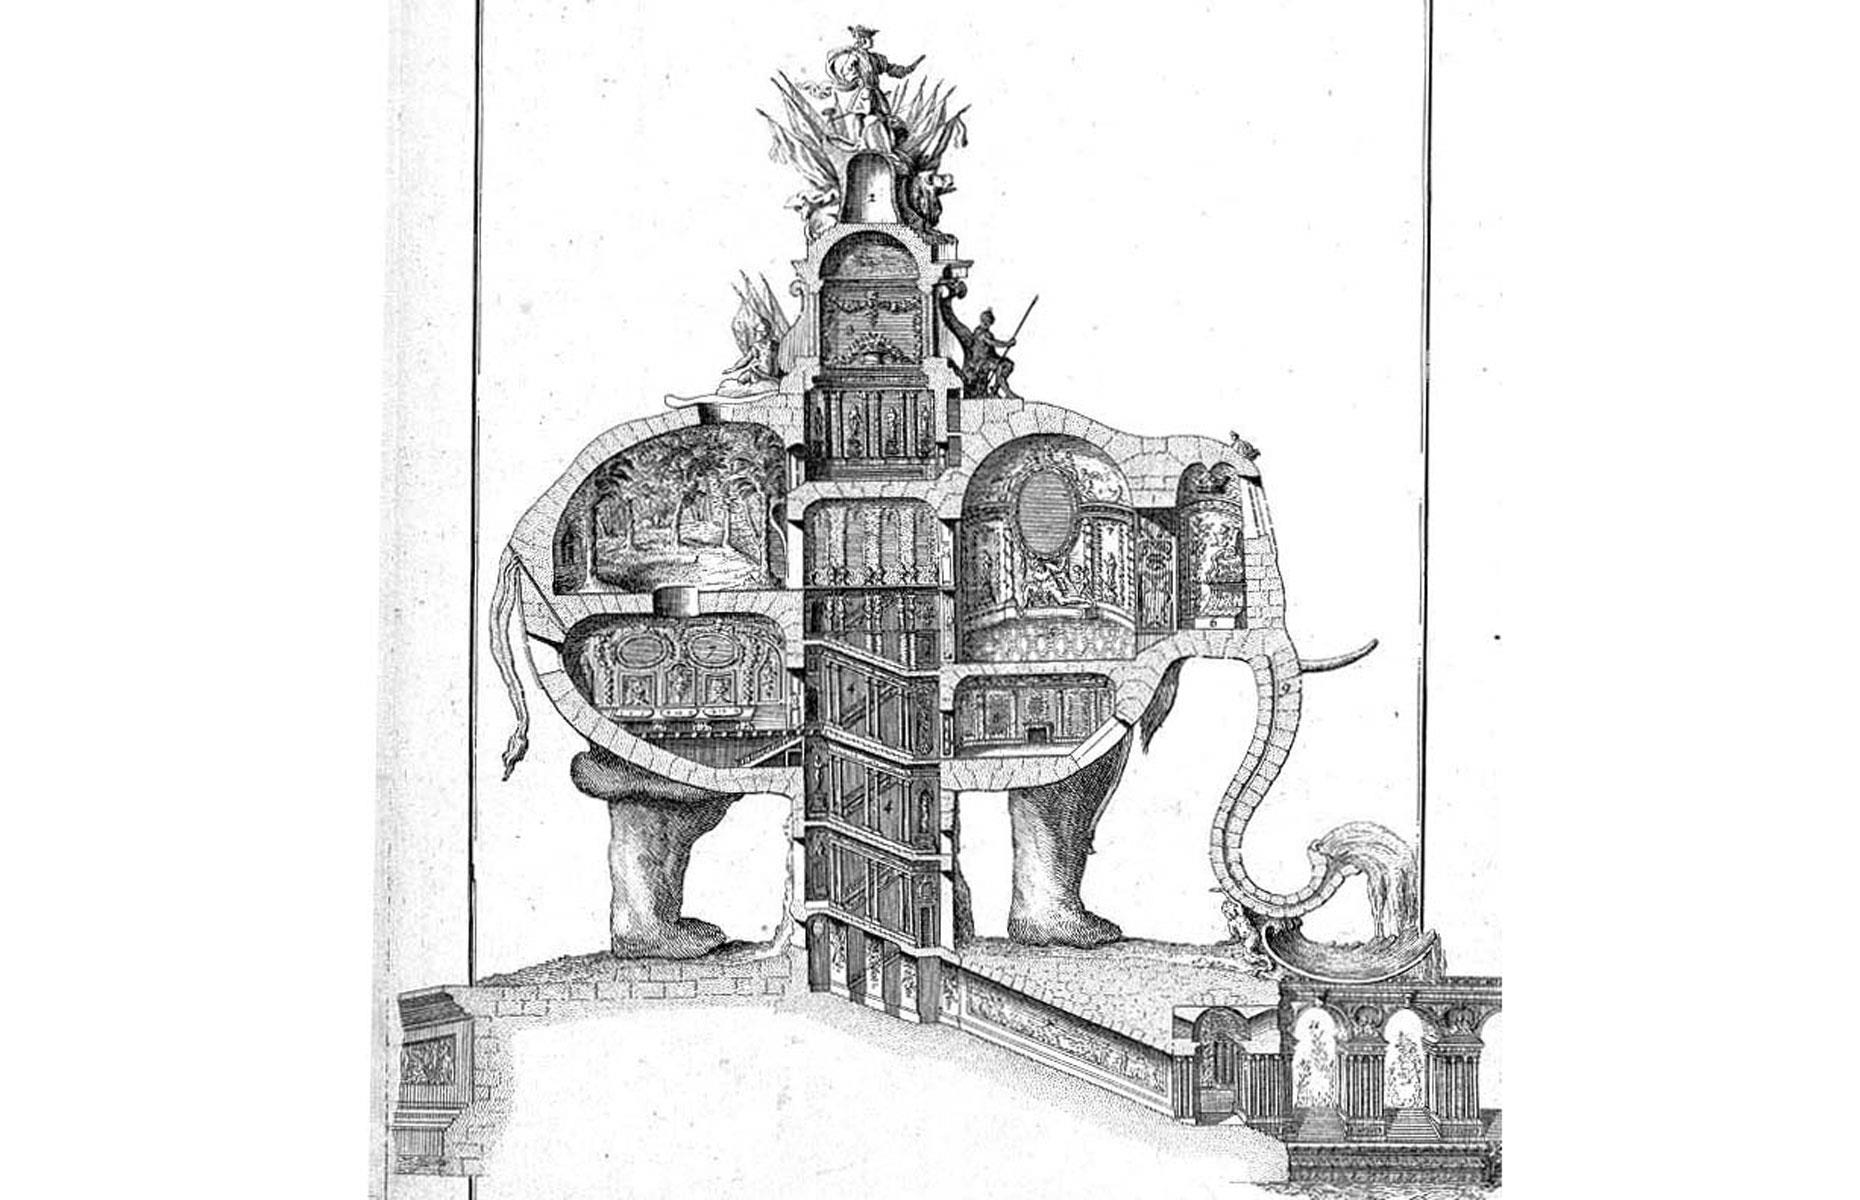 Weirdly, a grand elephant-shaped building was proposed for the site on which the Arc de Triomphe stands. Architect Charles Ribart planned the three-level structure in 1758, complete with primitive air con and foldaway furniture, but his wacky design was turned down by the authorities.